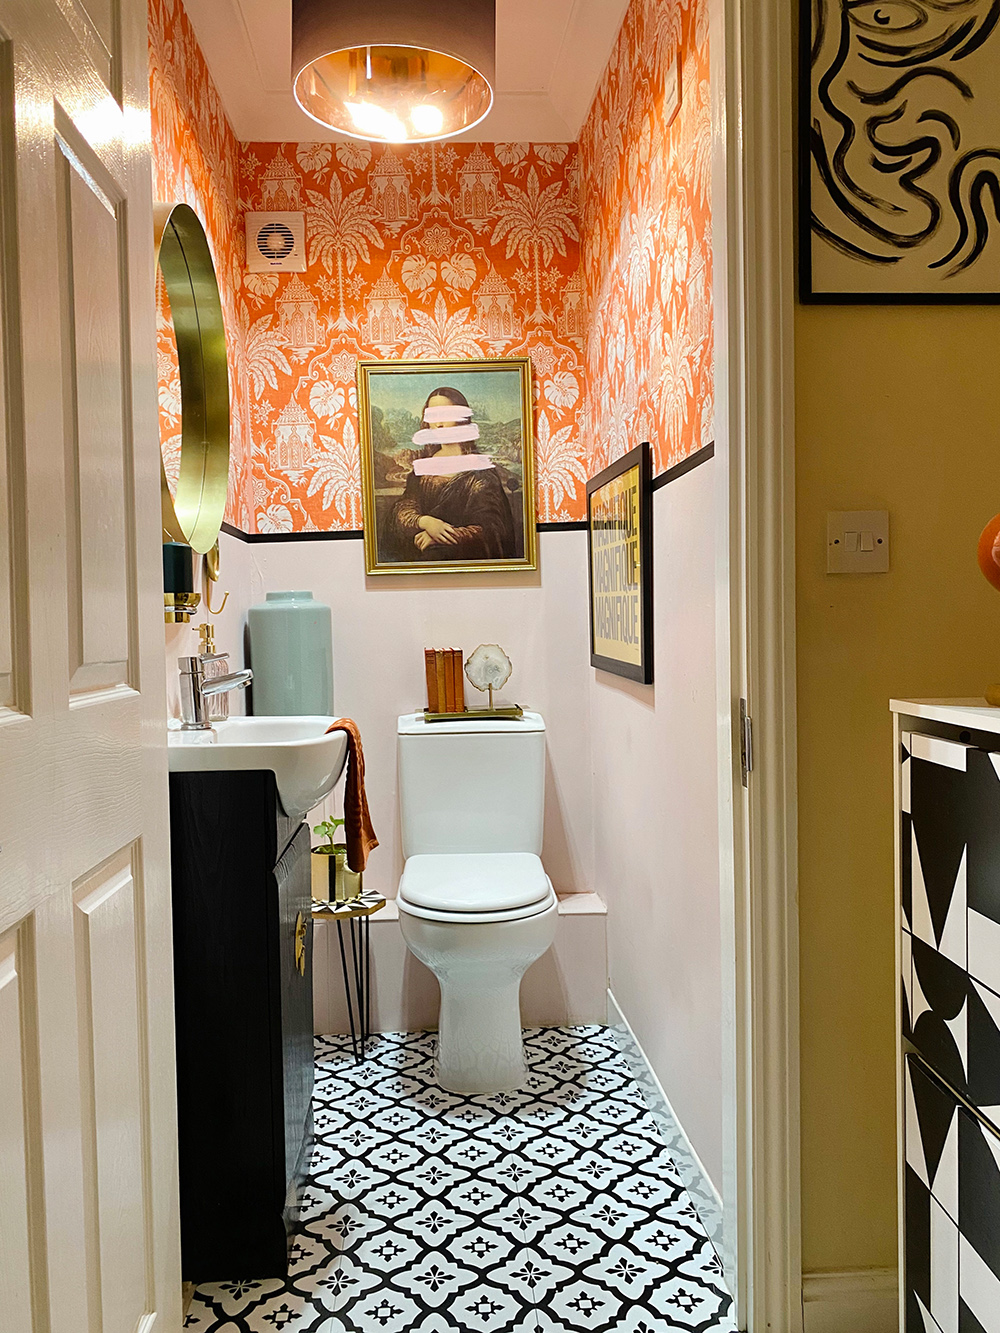 Gorgeous downstairs loo with with orange patterned wallpaper and monochrome patterned floor tiles.